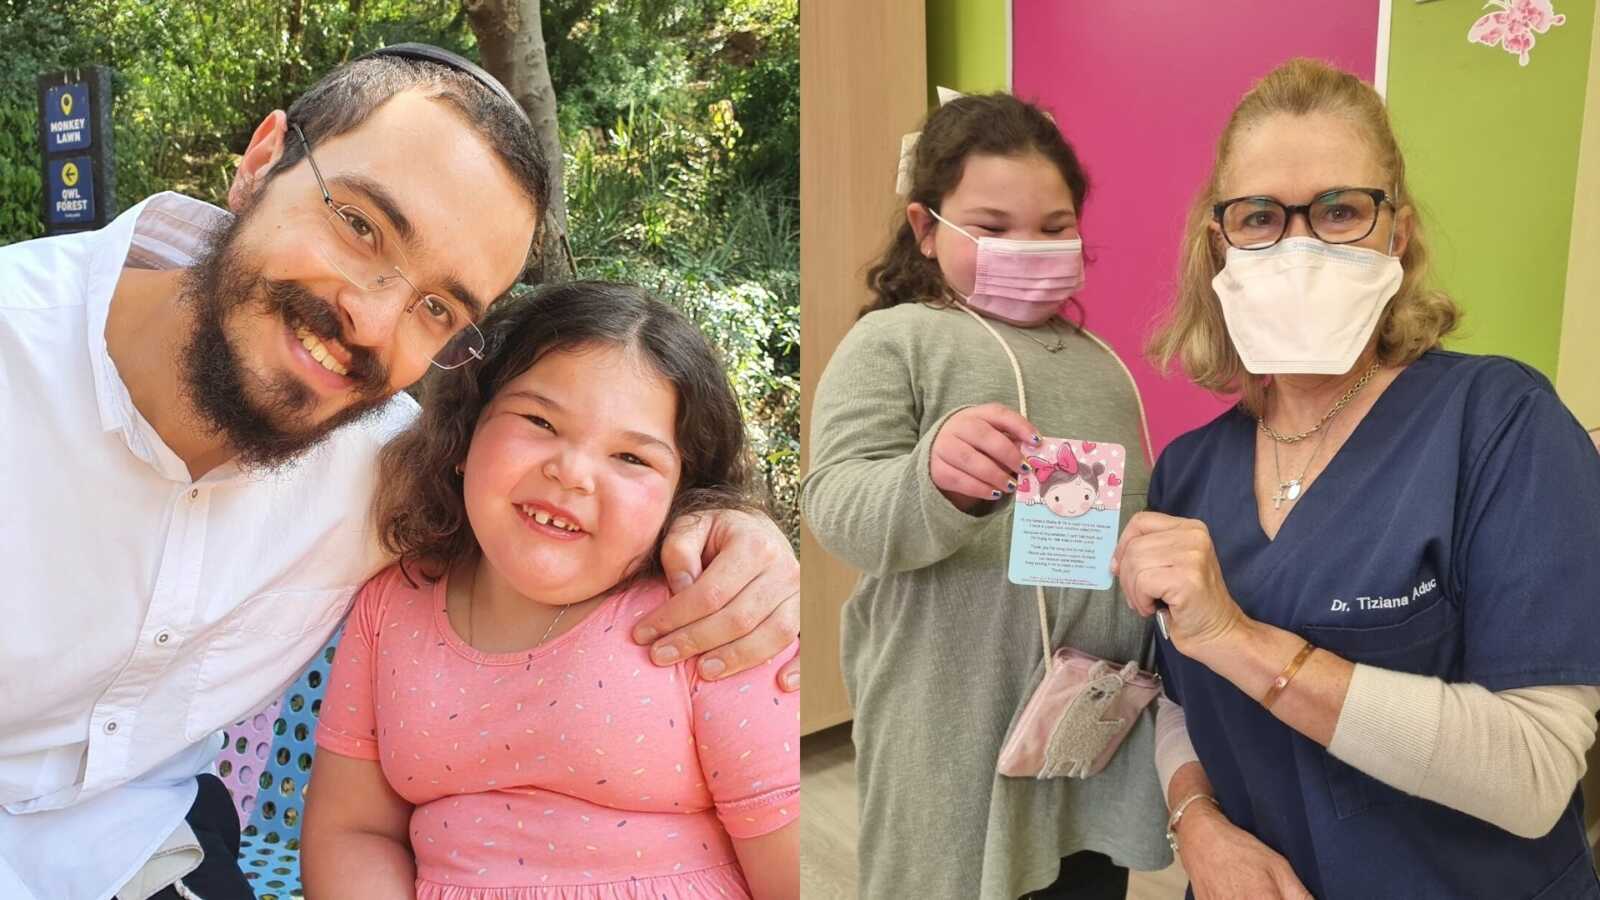 A girl and her dad and a child with rare condition spreads kindness